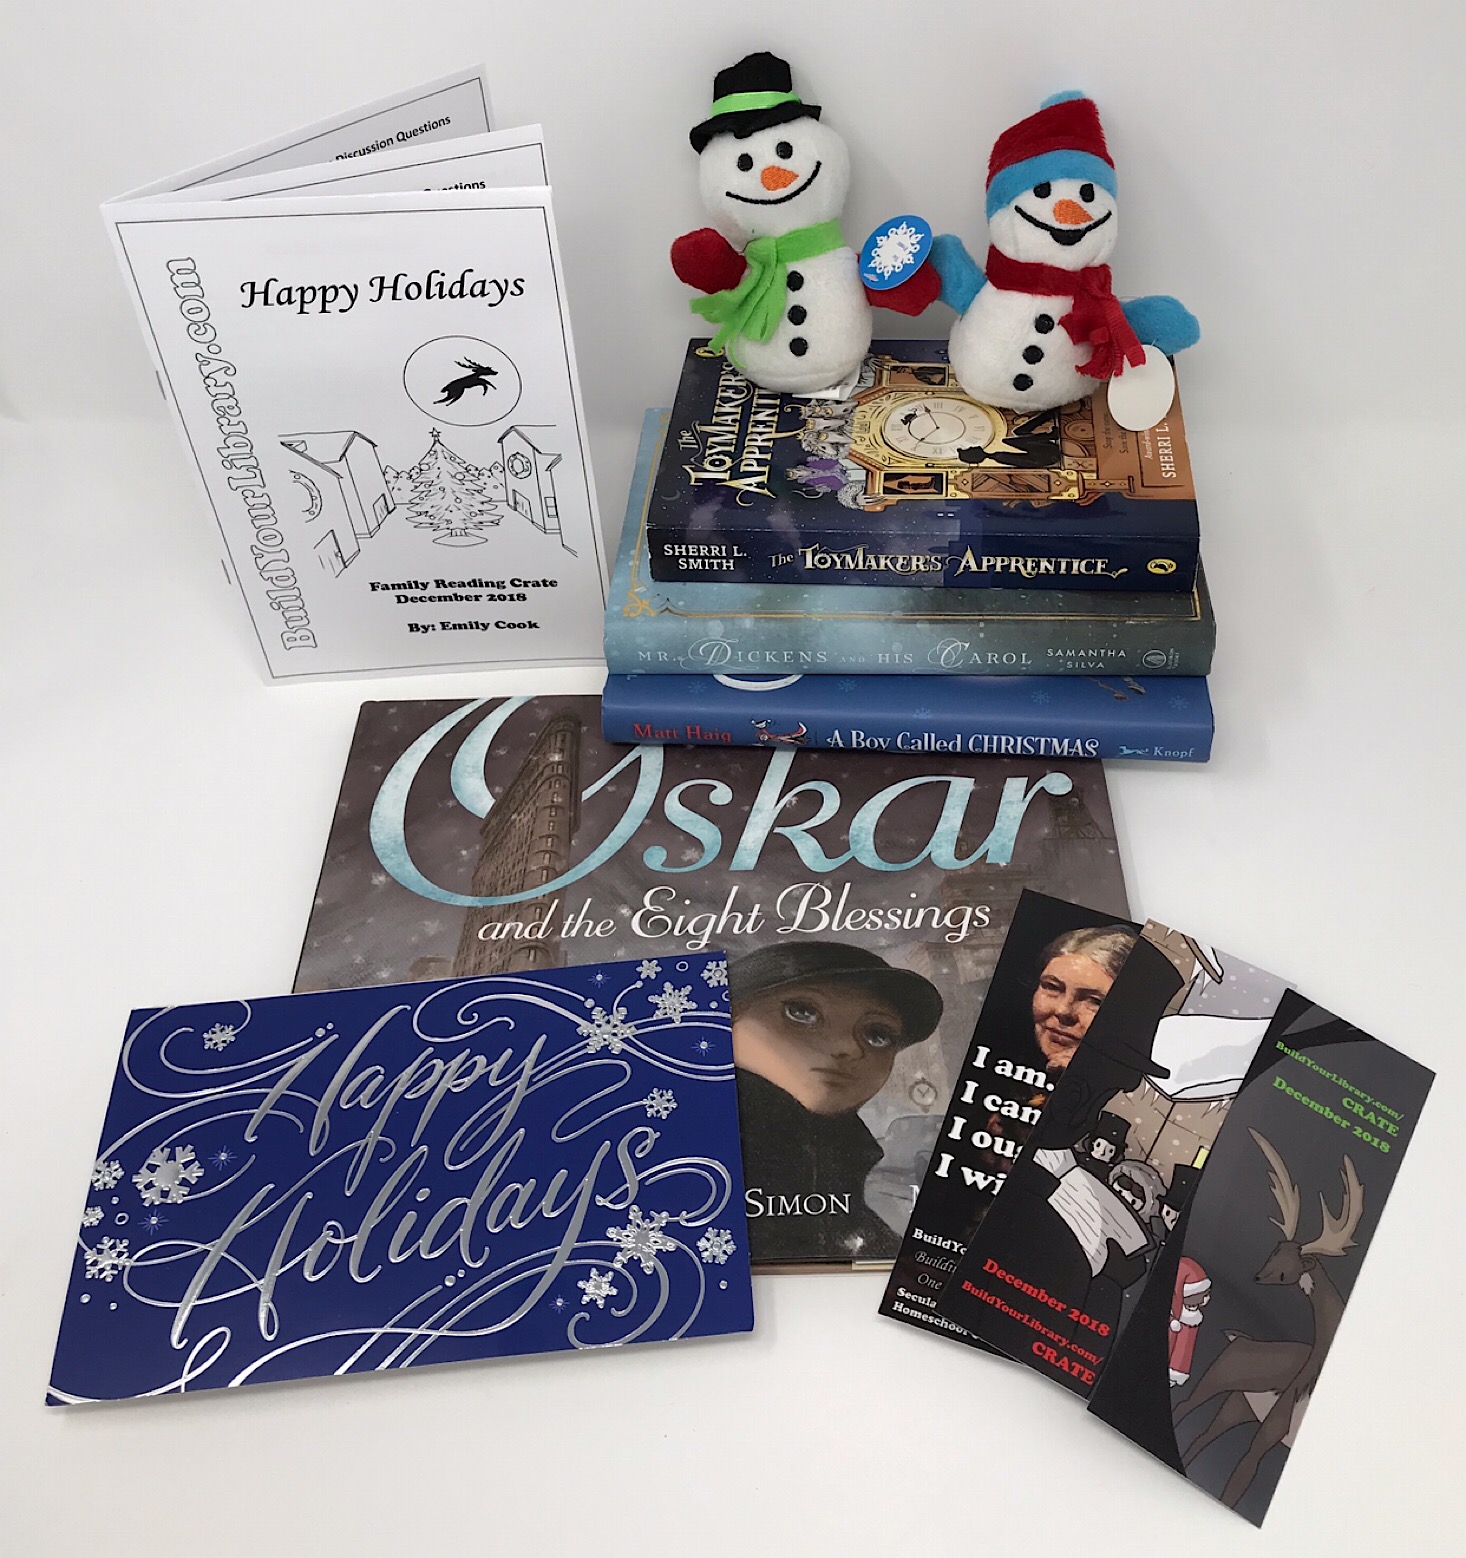 Family Reading Crate Subscription Review – December 2018